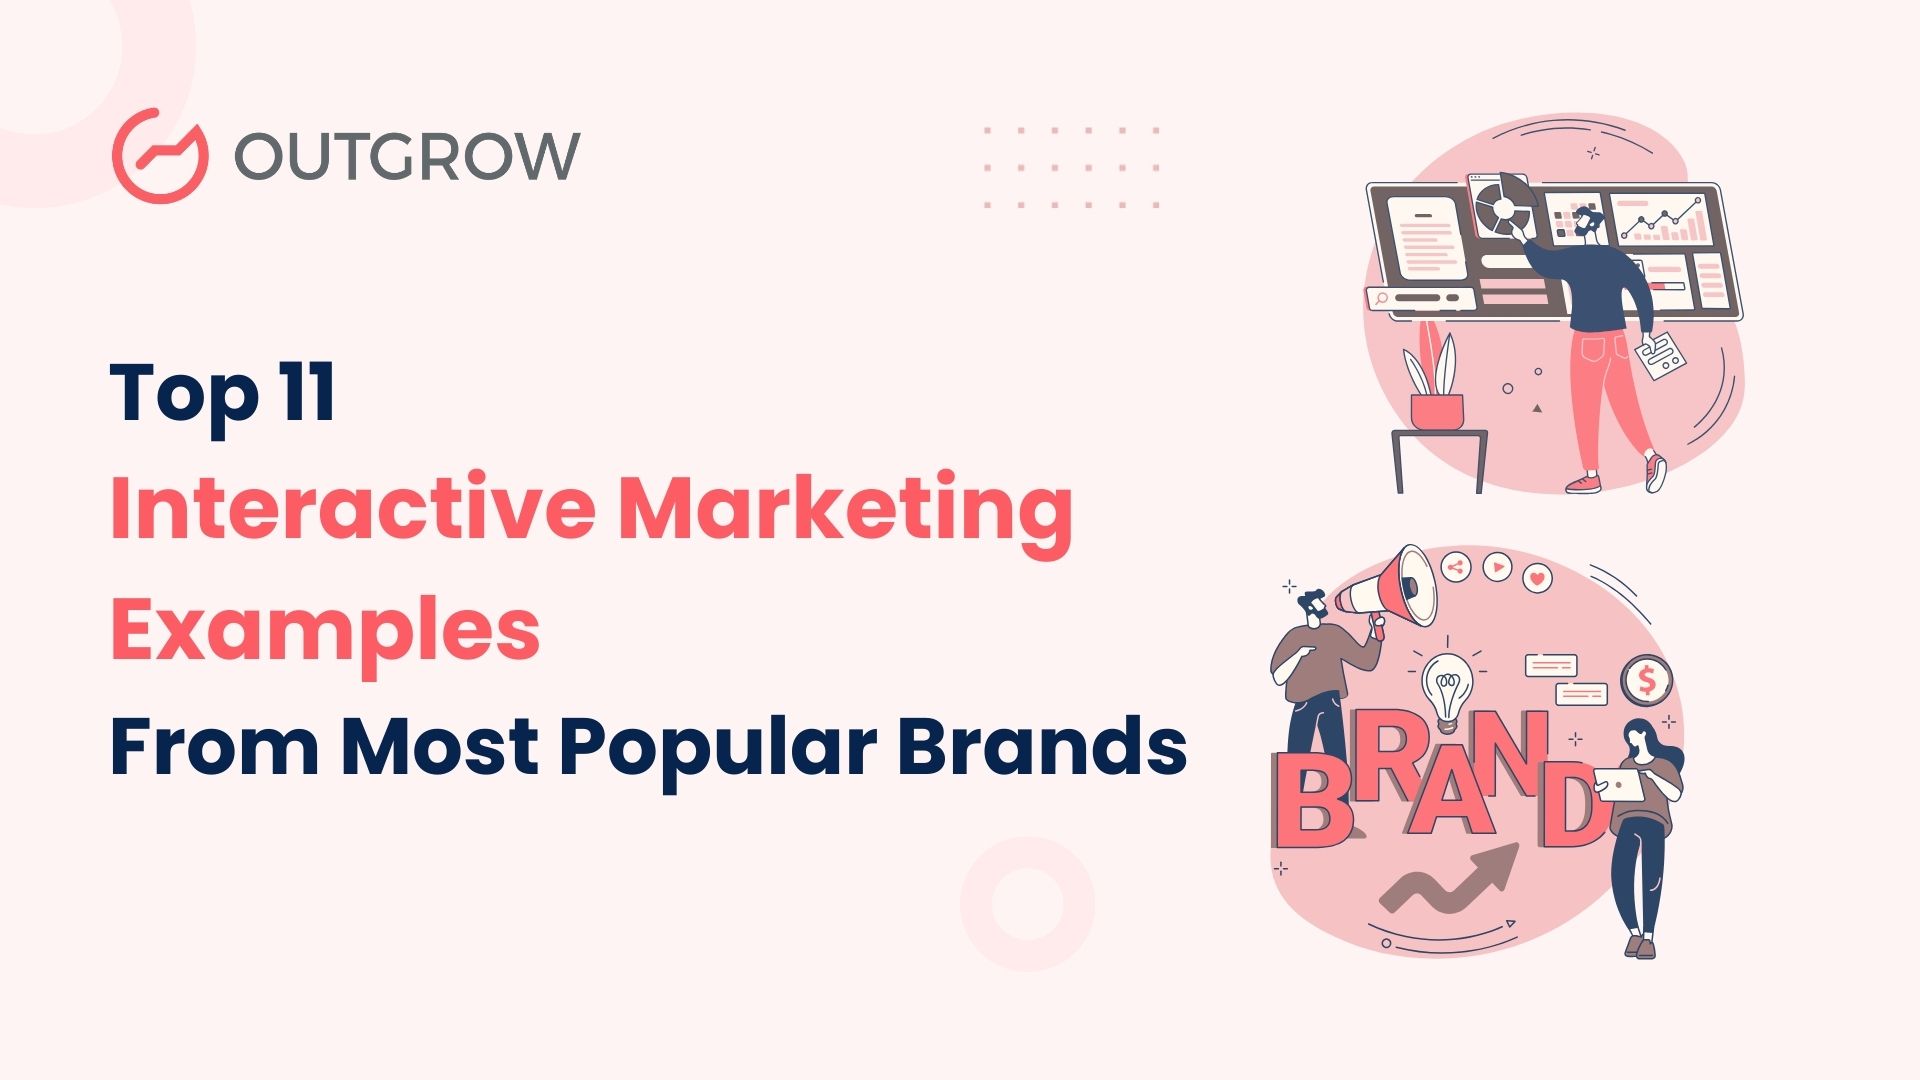 Top 11 Interactive Marketing Examples From Most Popular Brands